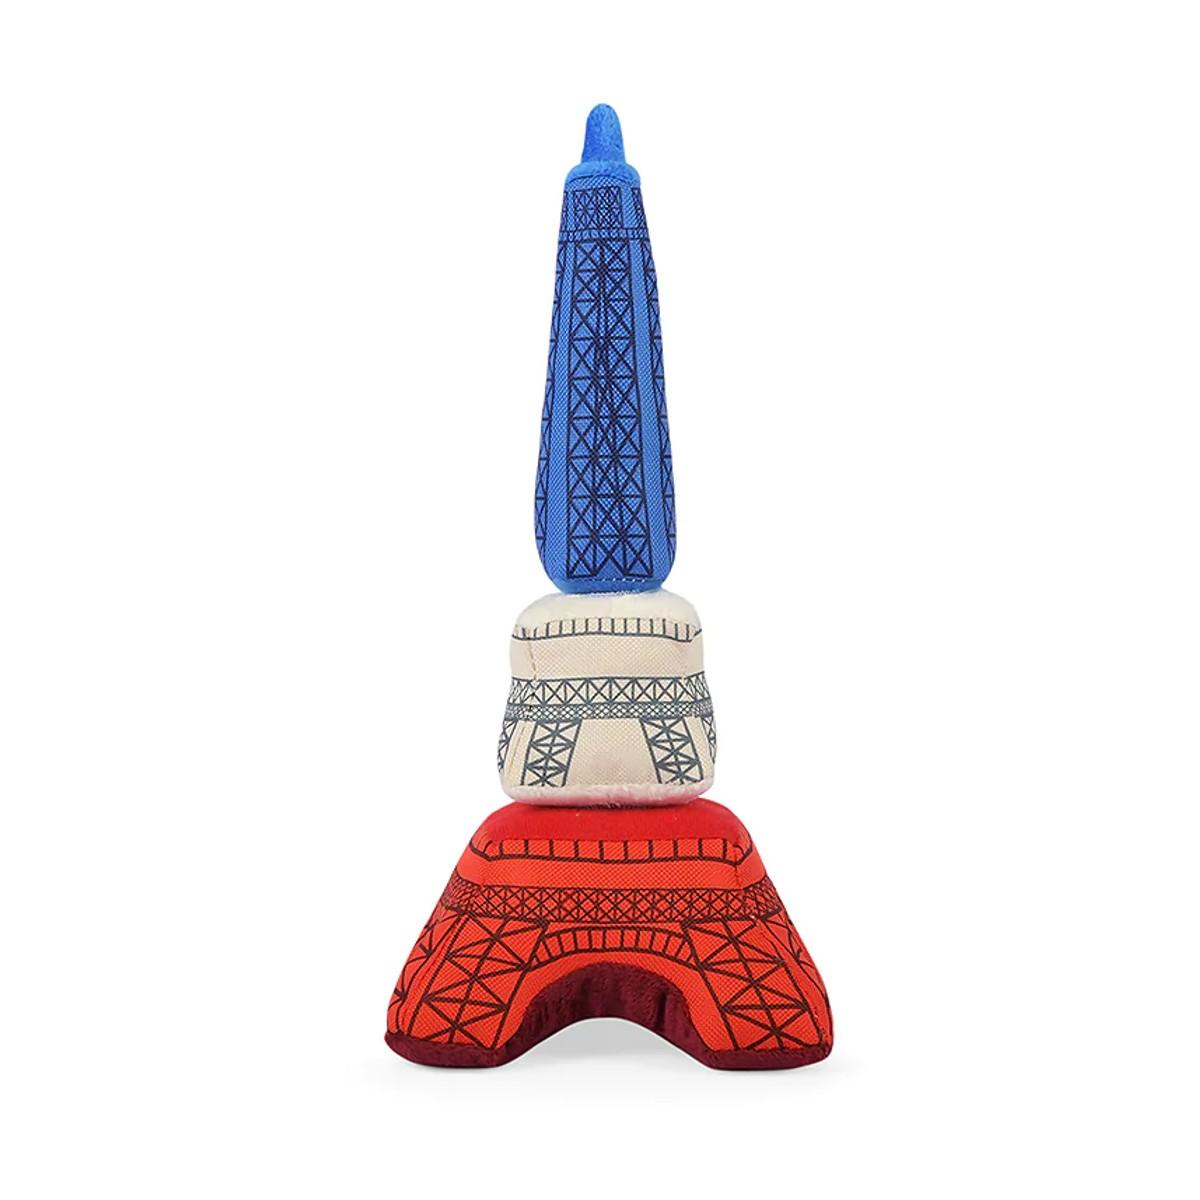 P.L.A.Y. Totally Touristy Dog Toy - Eiffel Tower